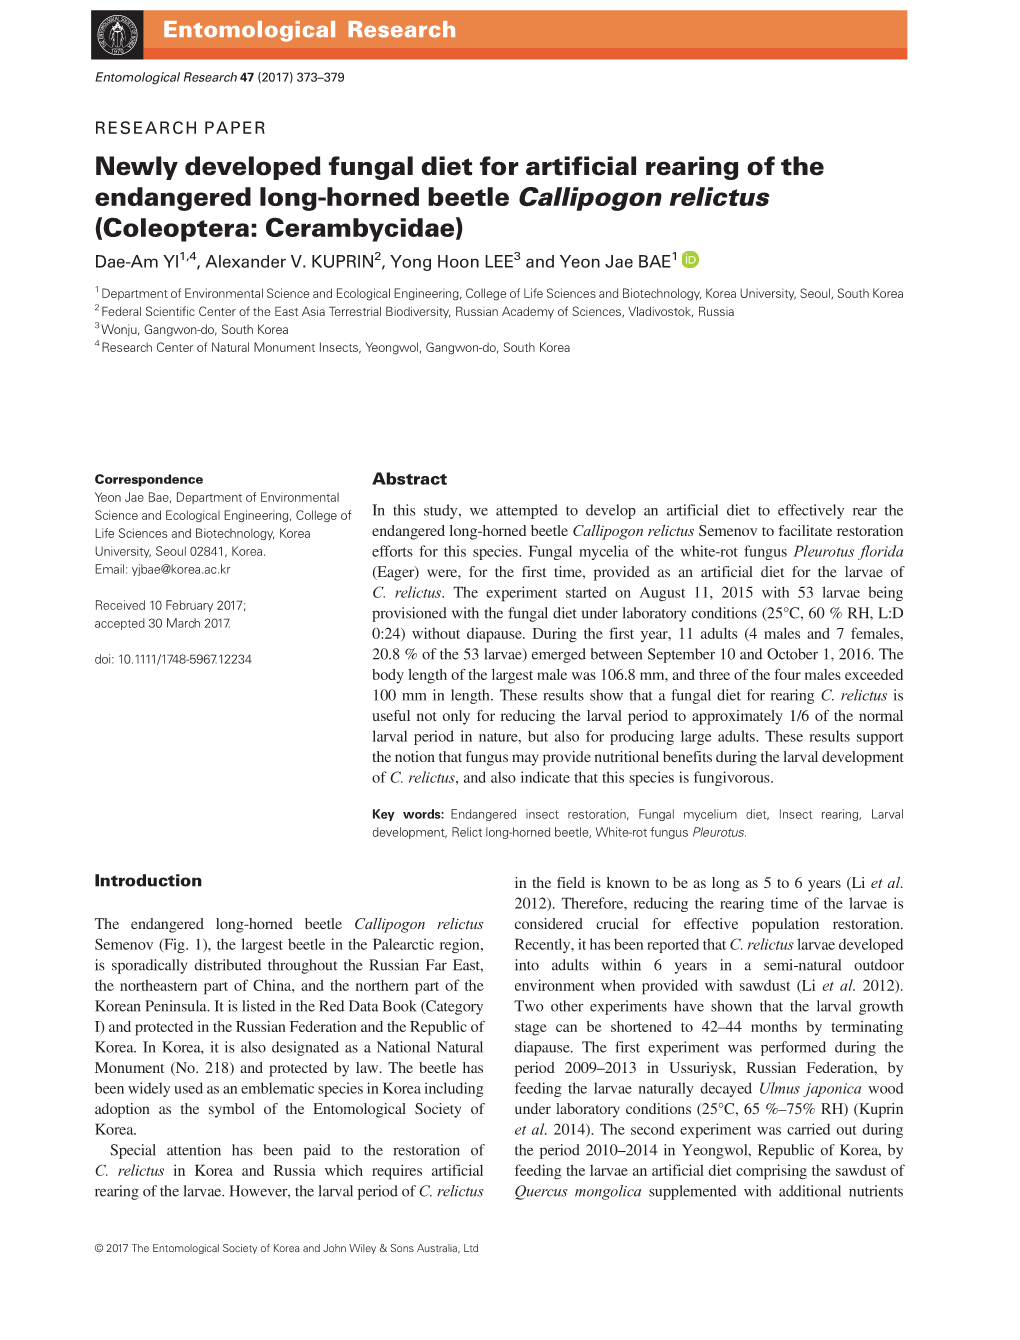 Newly Developed Fungal Diet for Artificial Rearing of the Endangered Long-Horned Beetle Callipogon Relictus (Coleoptera: Cerambycidae) Dae-Am YI1,4, Alexander V